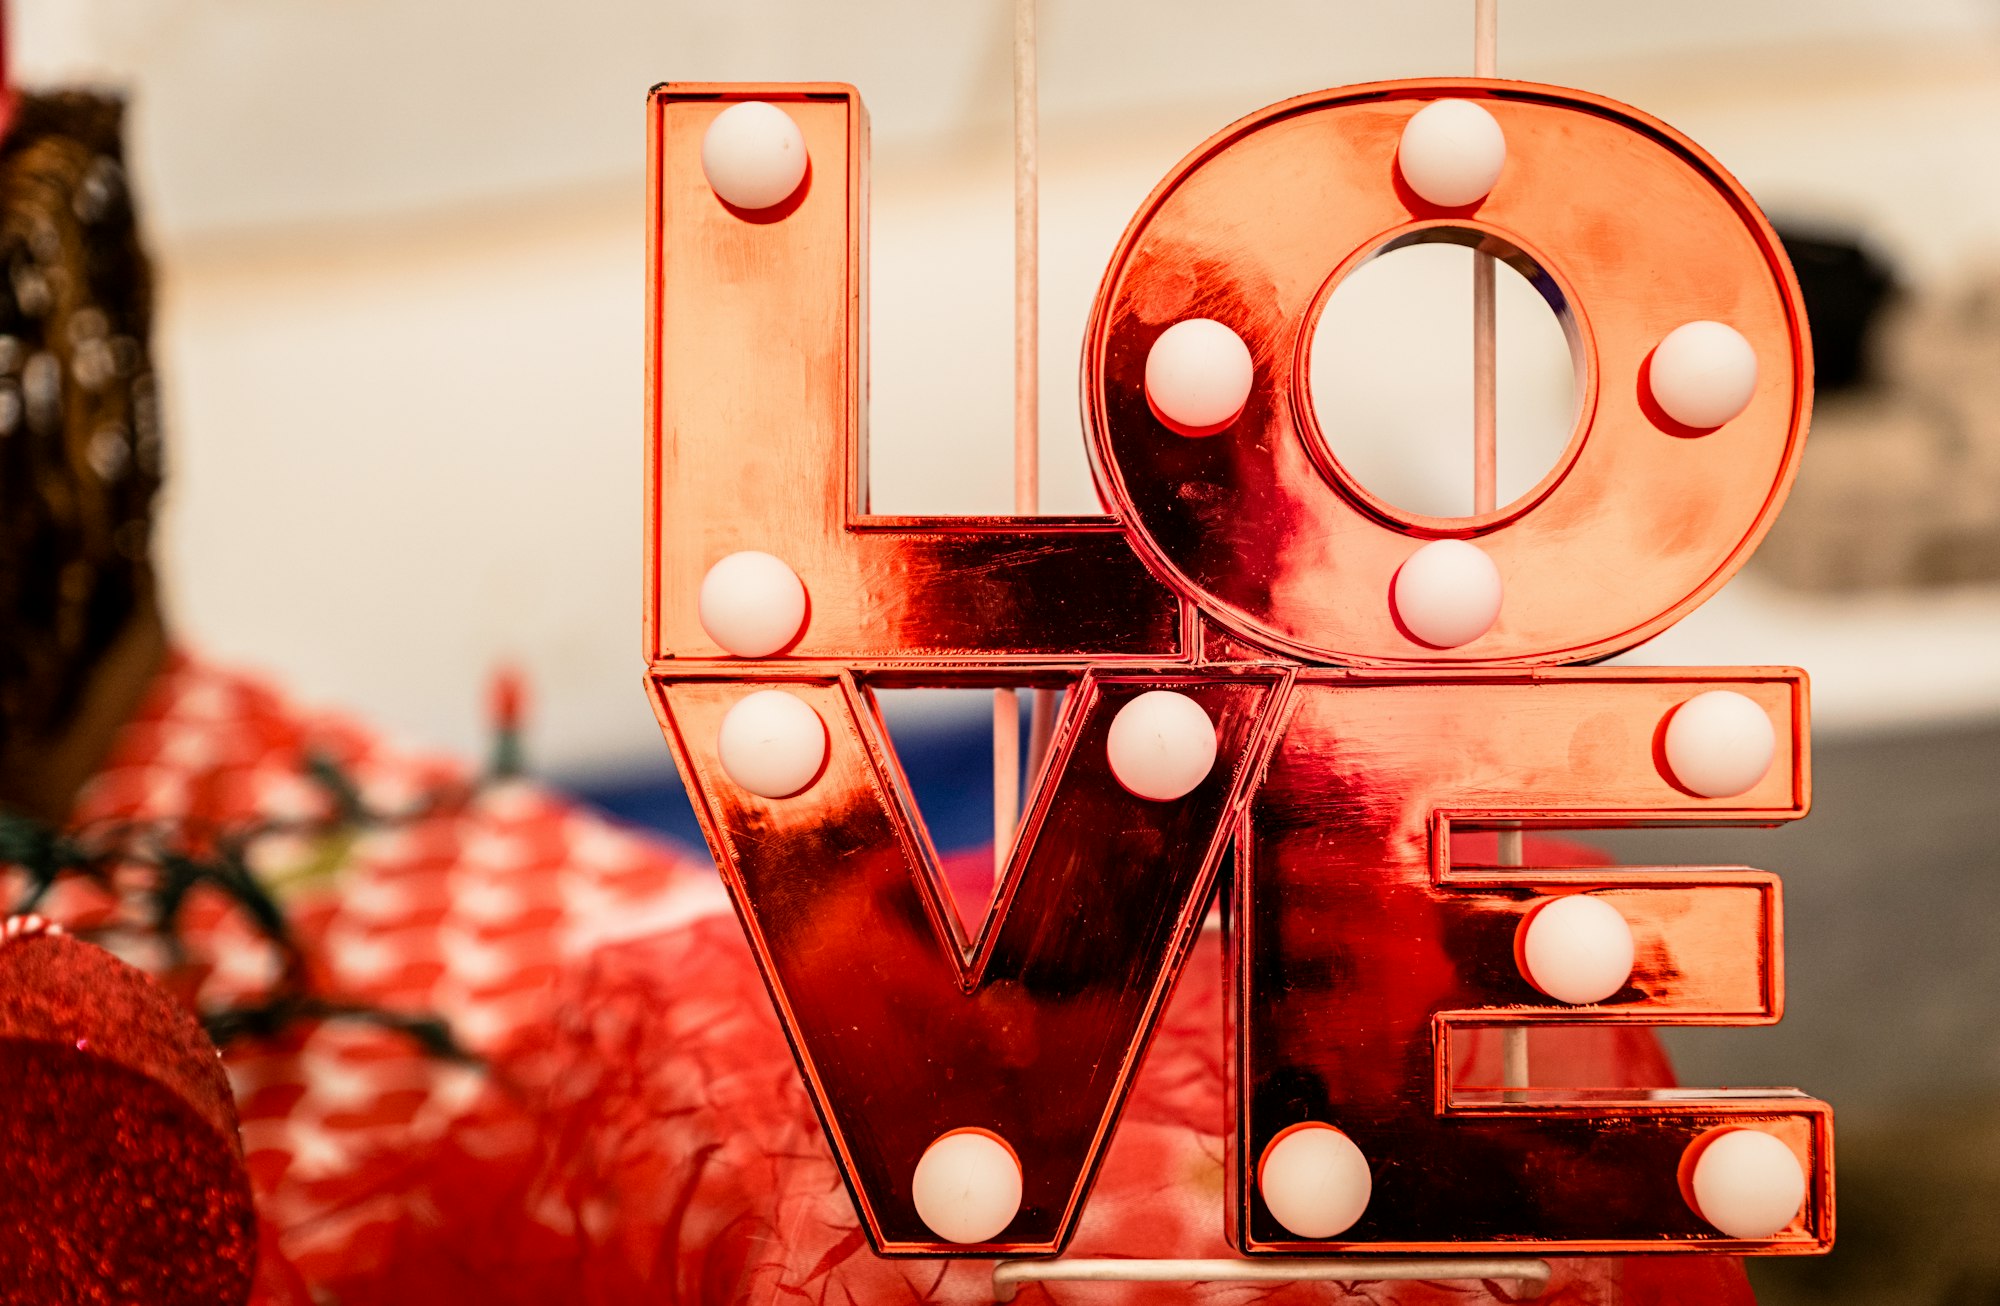 We were exploring the various booths and tents at the Loveland Fire & Ice festival when I found this sign setup inside a massive inflatable igloo. The lighting inside the igloo was beautifully diffused and practically begged me to take photos. This sign was sitting on a display table and does an amazing job summing up the heart and culture that is the Loveland art community.